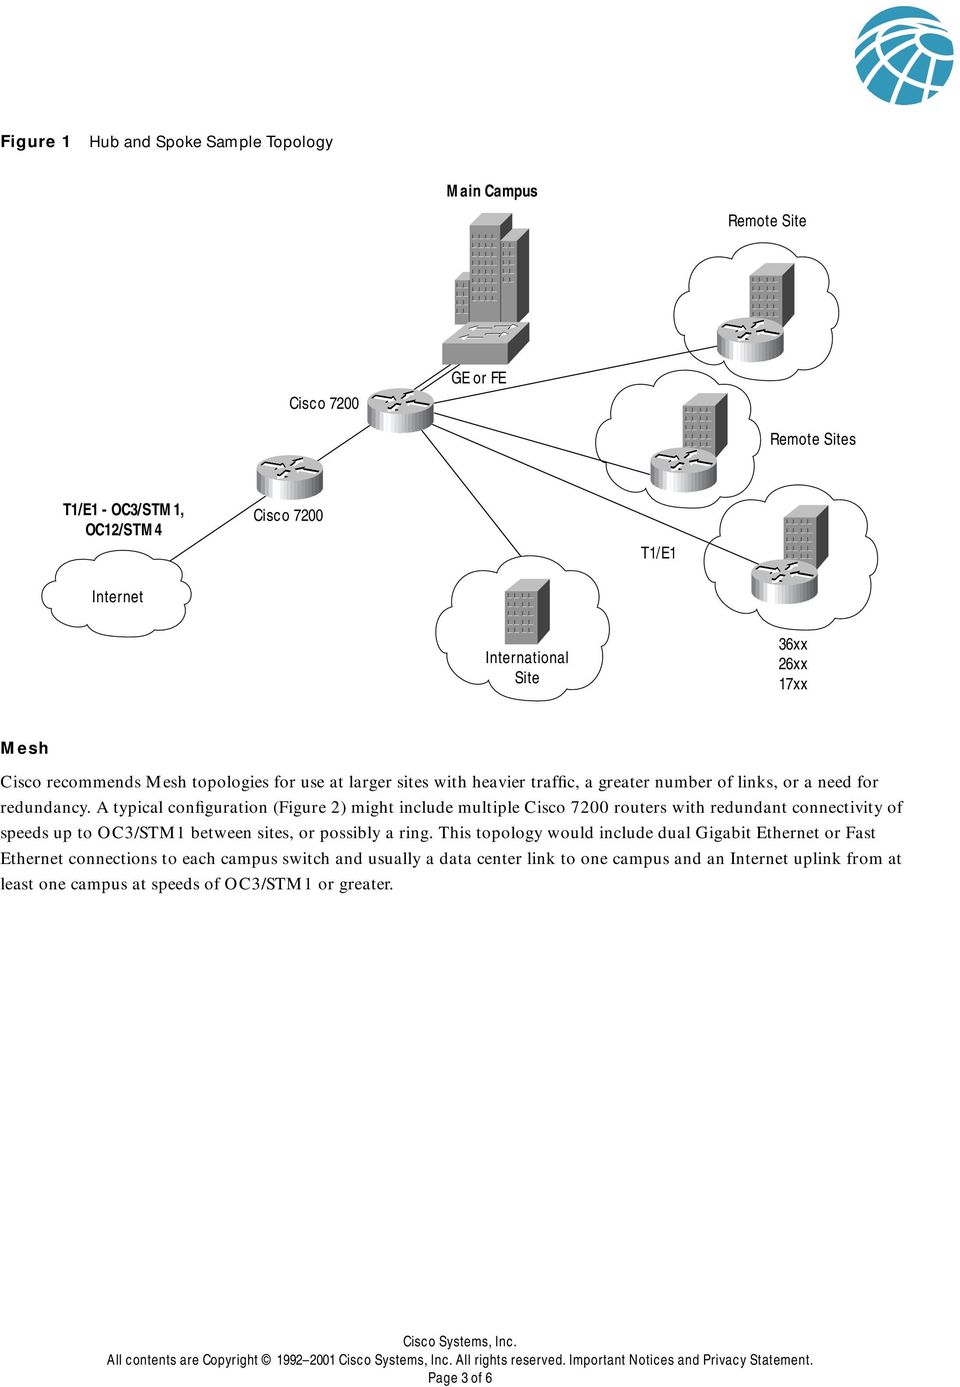 A typical configuration (Figure 2) might include multiple routers with redundant connectivity of speeds up to OC3/STM1 between sites, or possibly a ring.